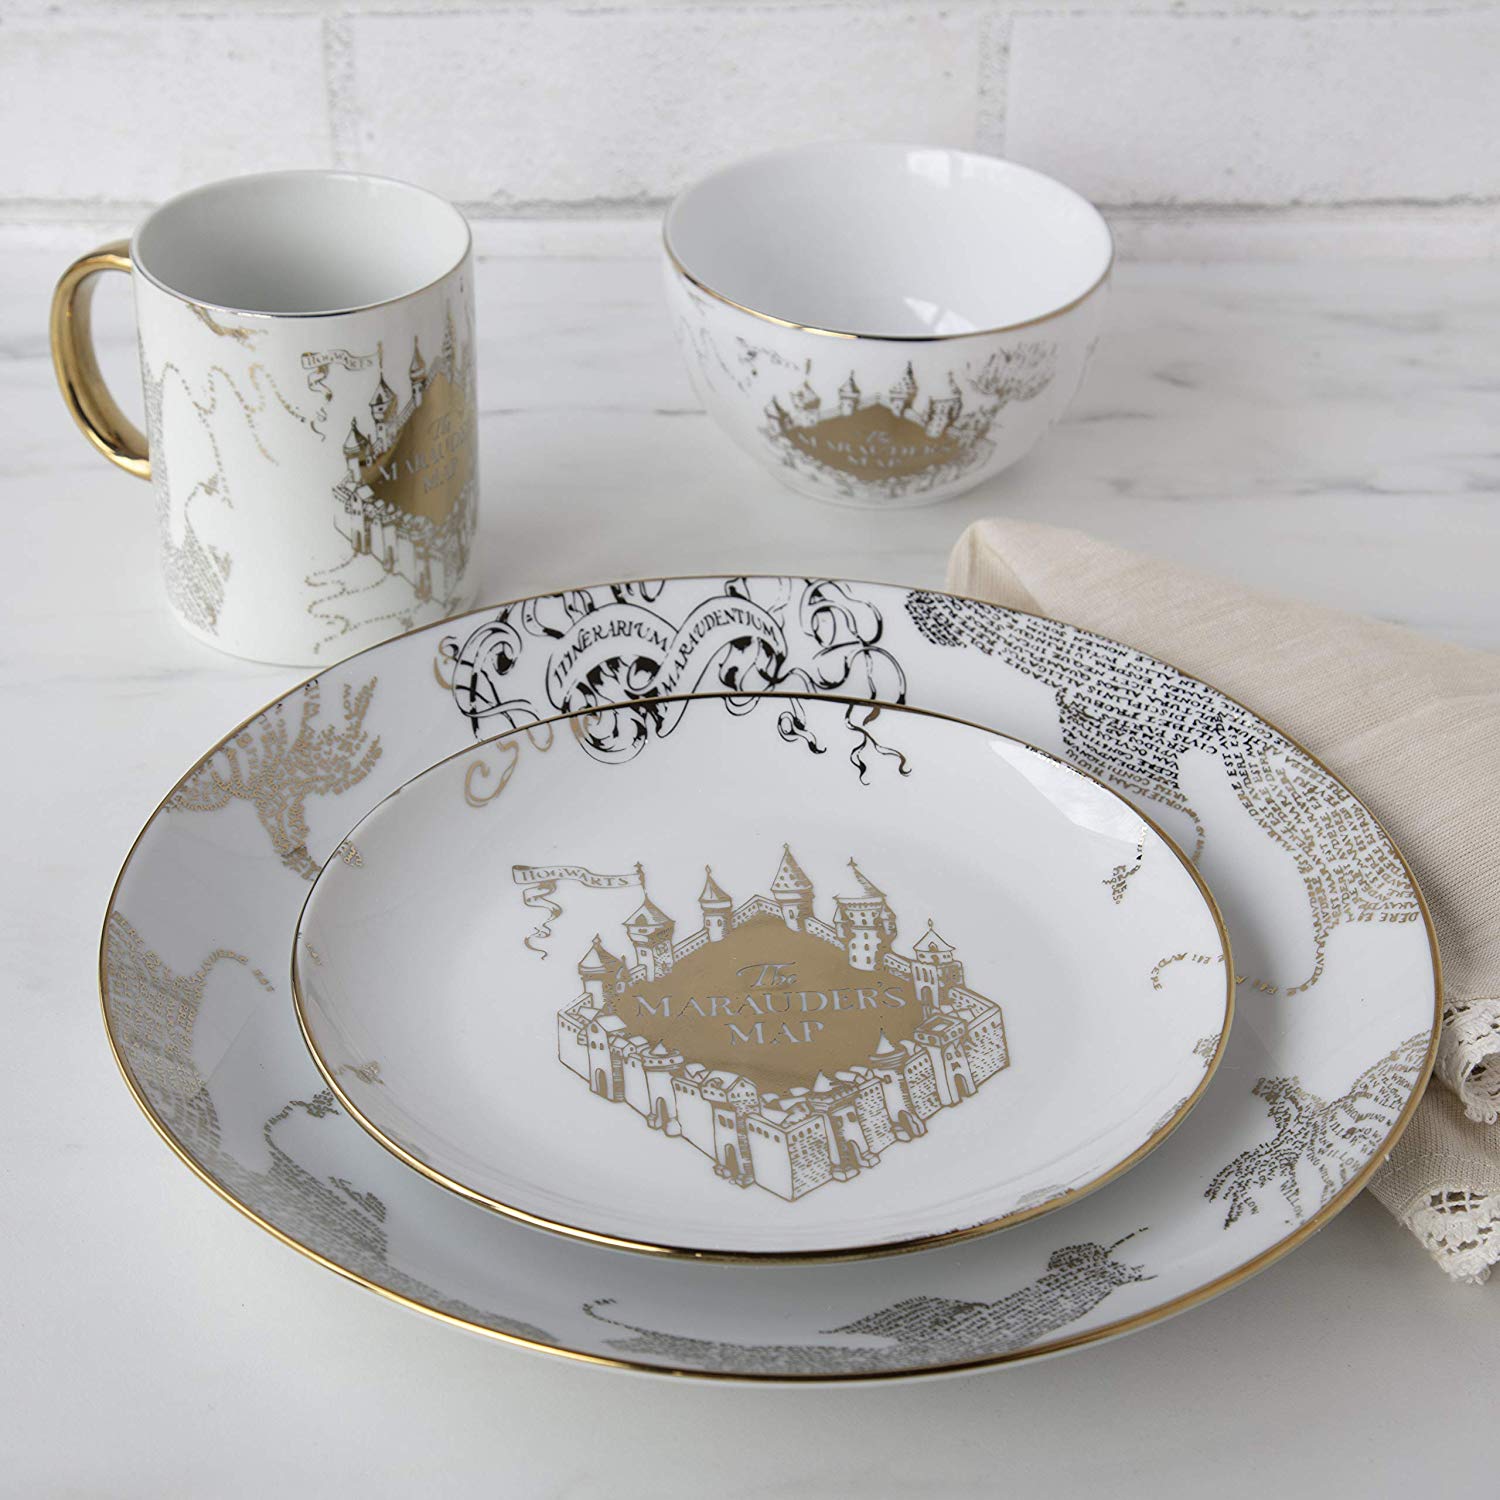 This Harry Potter Marauder’s Map Dinner Set Will Make You Feel Like You’re Eating In The Great Hall